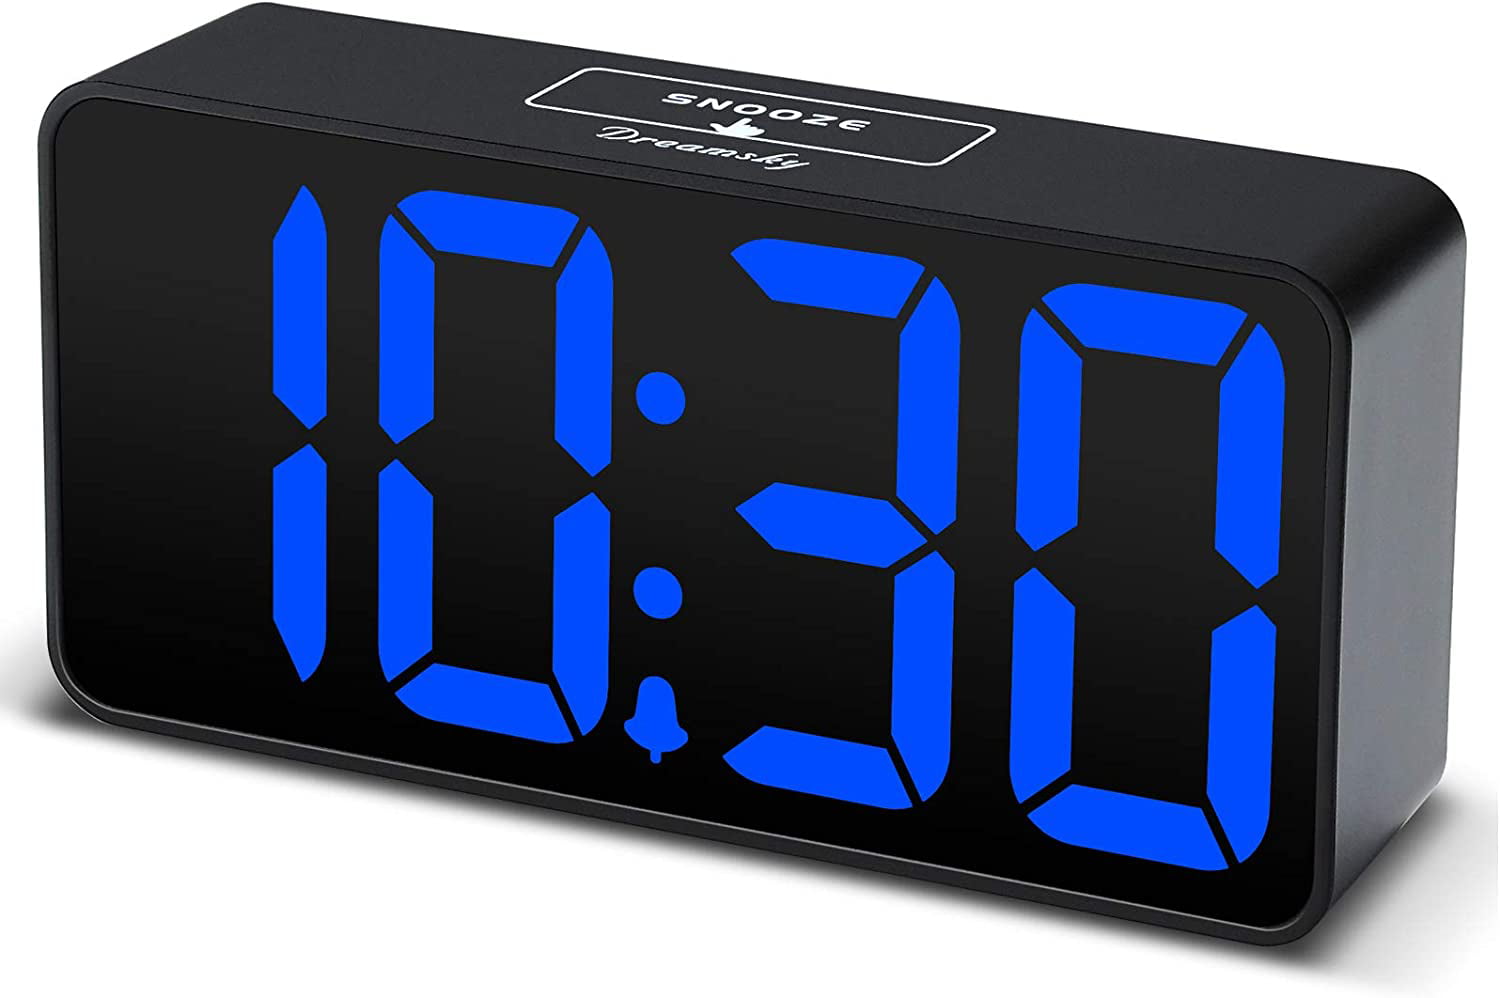 Digital FM Radio Clock with Snooze 12/24H DreamSky Alarm Clock Radio with Dual USB Charging Ports for Bedroom 1.4 Inches Blue Digits with Adjustable Dimmer DST 